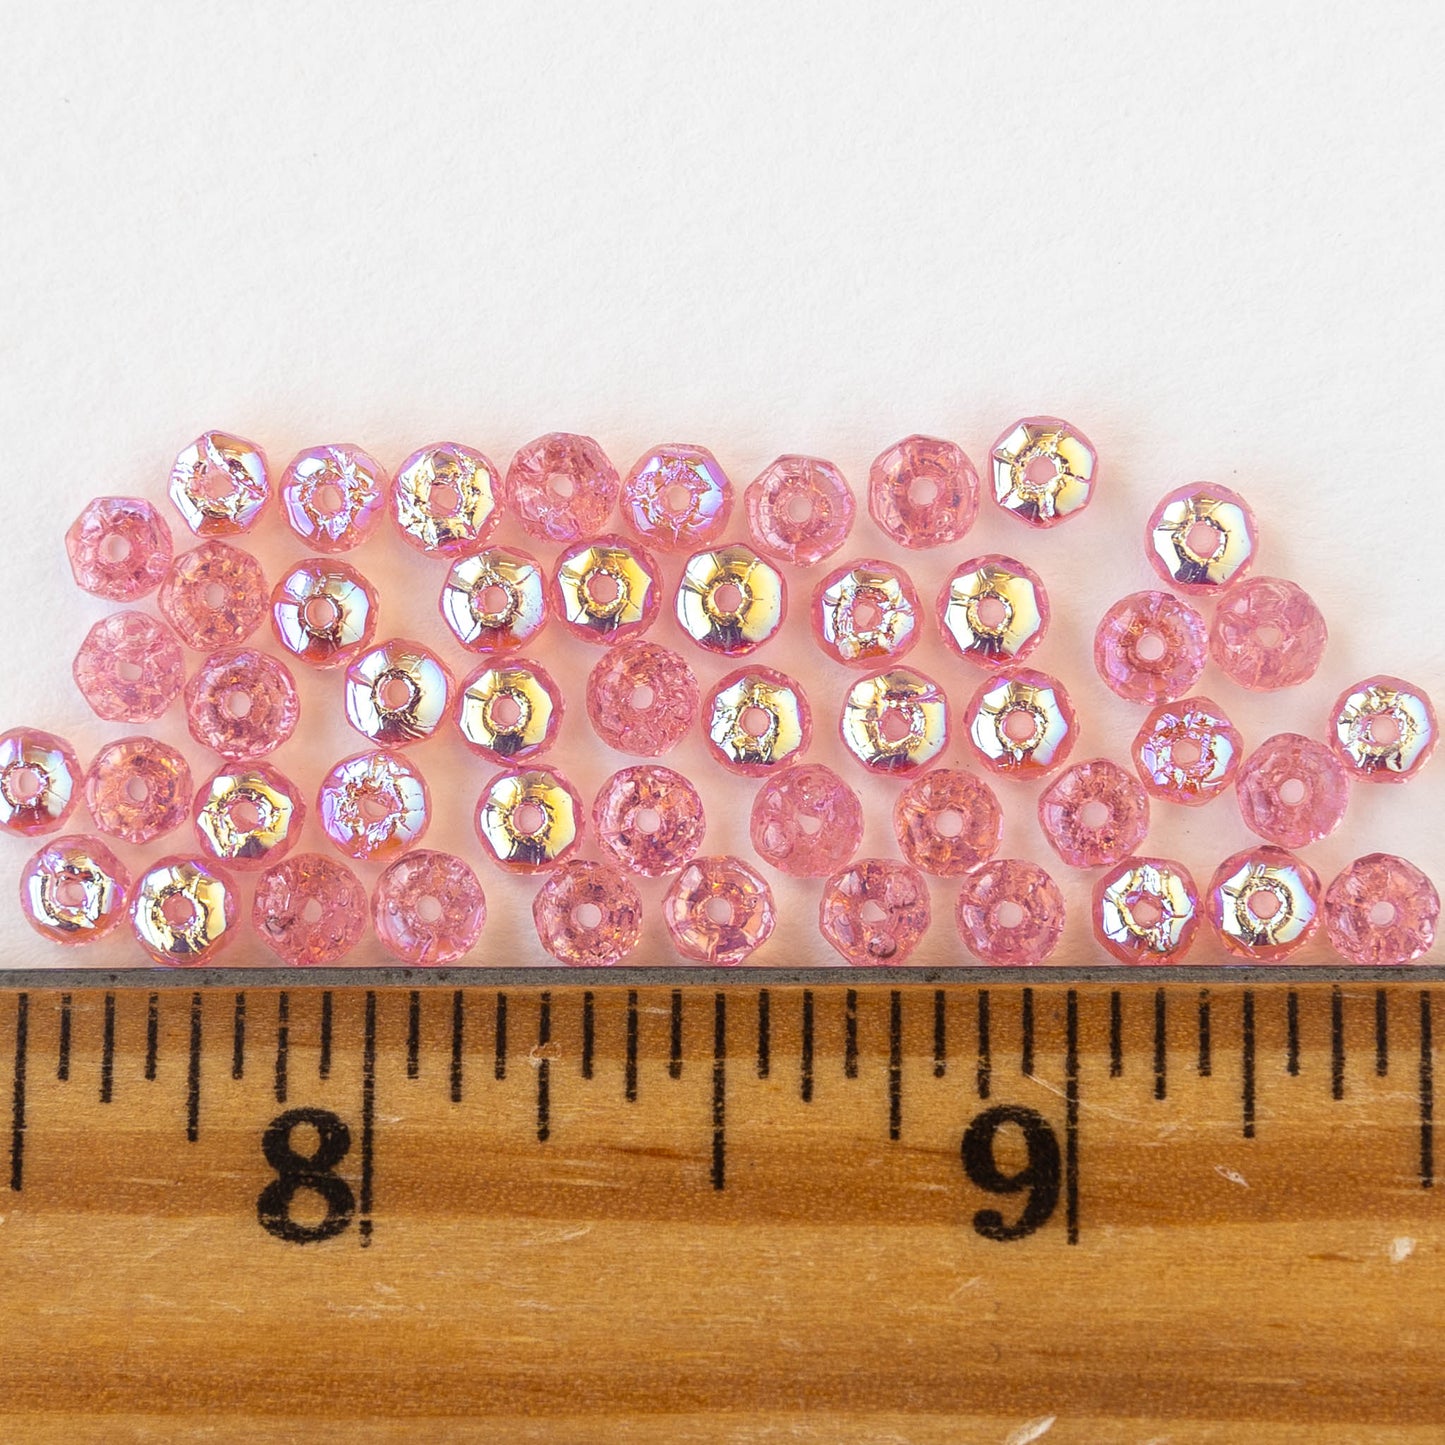 4mm Faceted Rondelle Beads - Light Pink AB - 50 beads